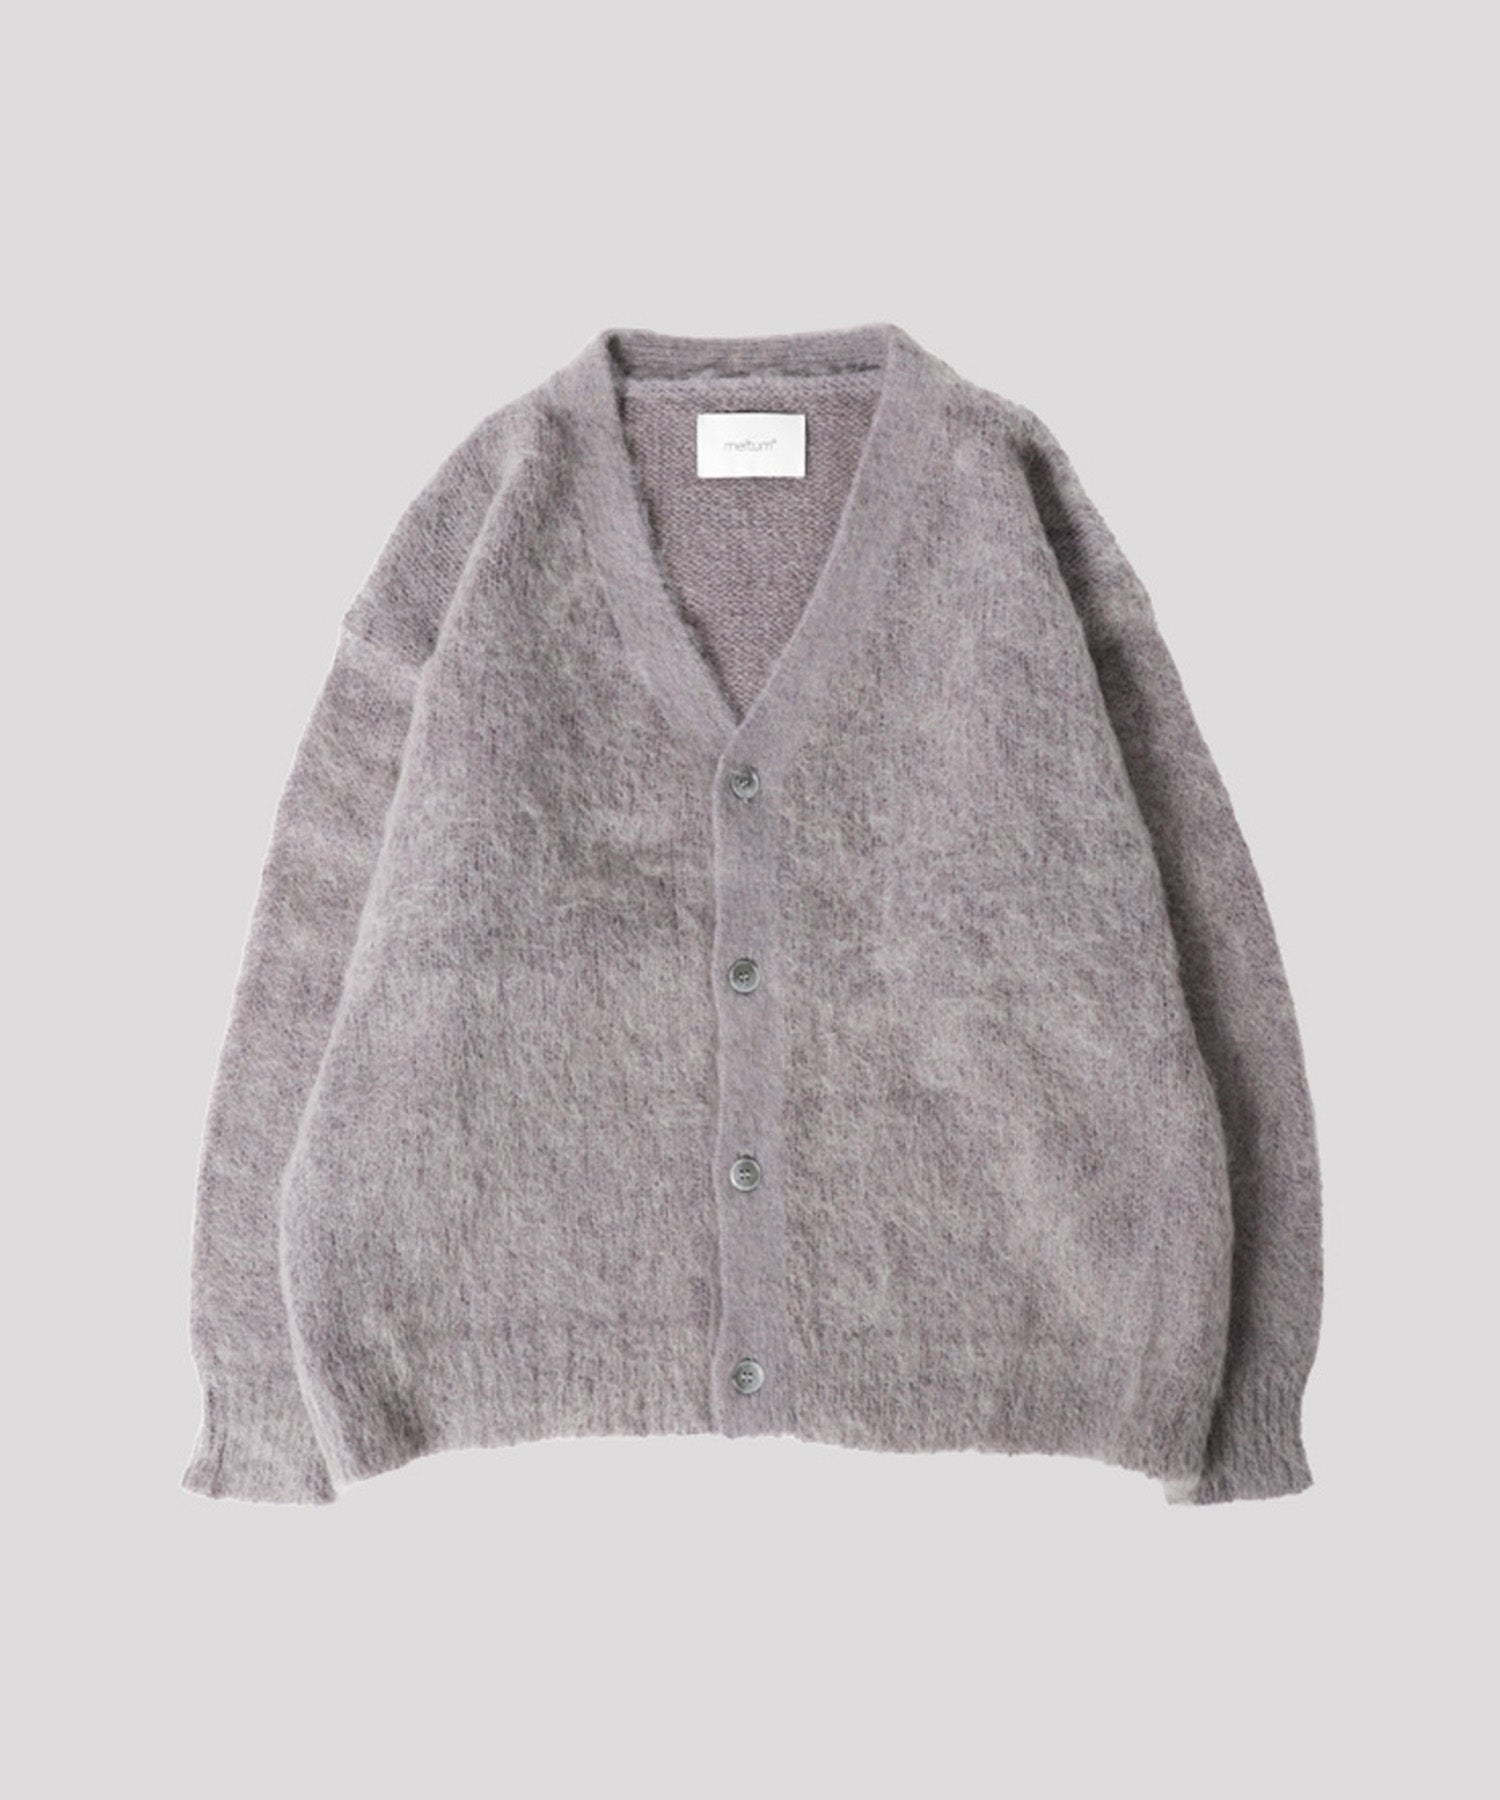 Size50新品《 OUR LEGACY 》CARDIGAN / Grey Mohair